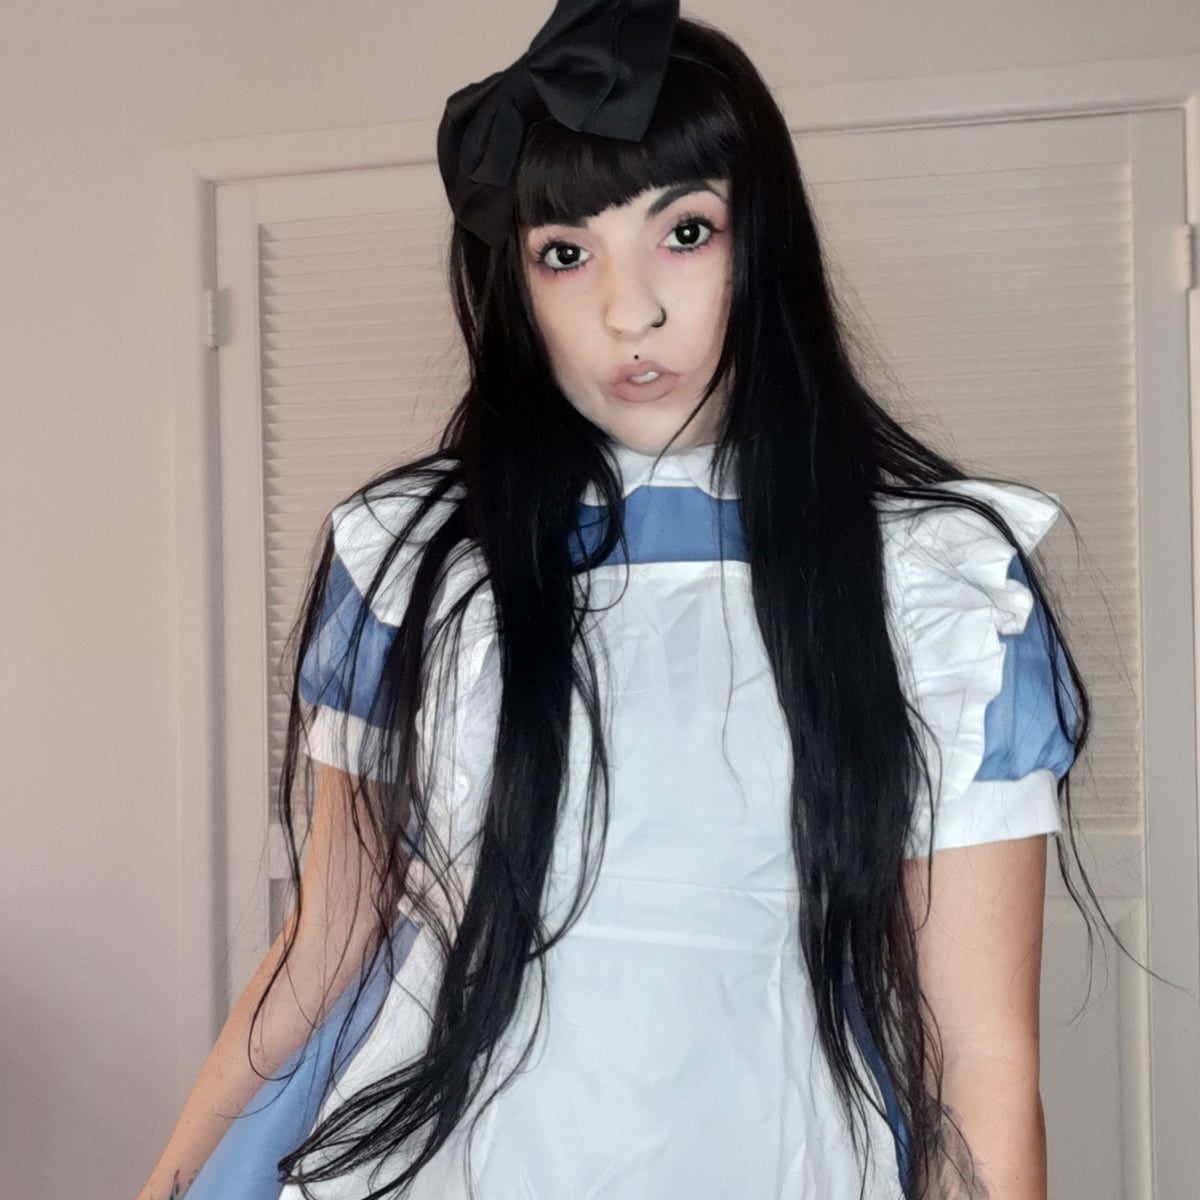 Review for Lolita cosplay maid costume YV30022